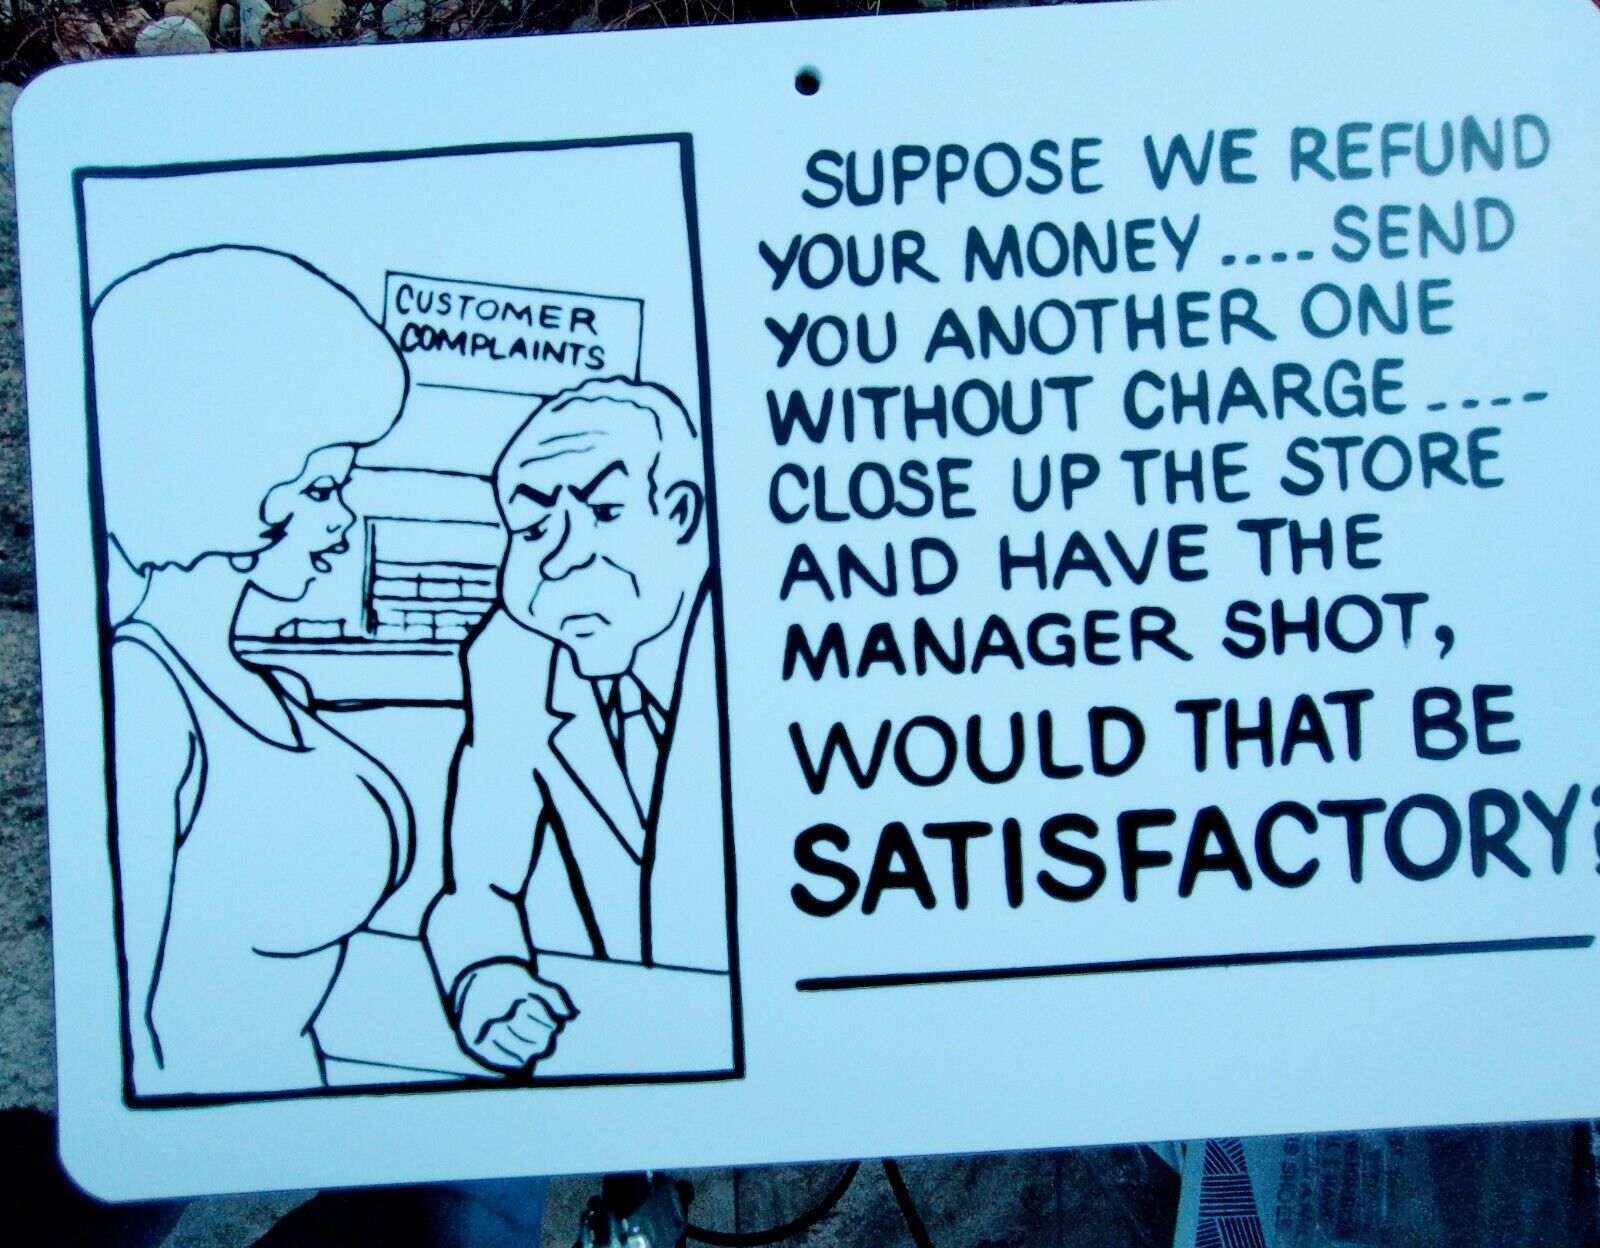 sign humorous funny Customer Complaints Suppose we refund your money send you 